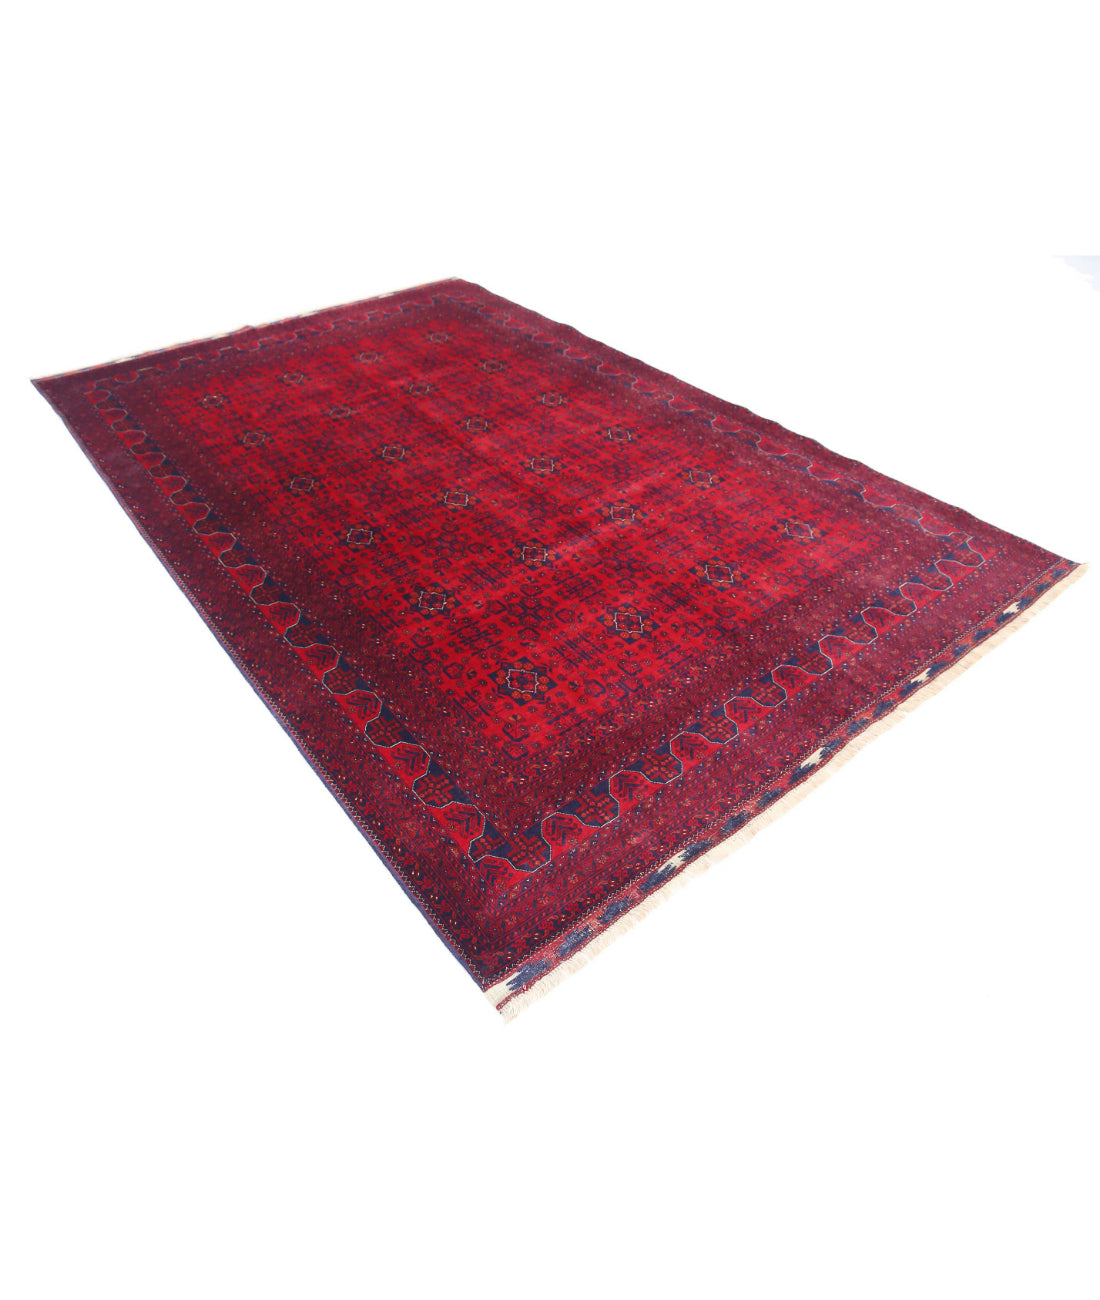 Hand Knotted Afghan Beljik Wool Rug - 6'6'' x 9'7'' 6'6'' x 9'7'' (195 X 288) / Red / Red